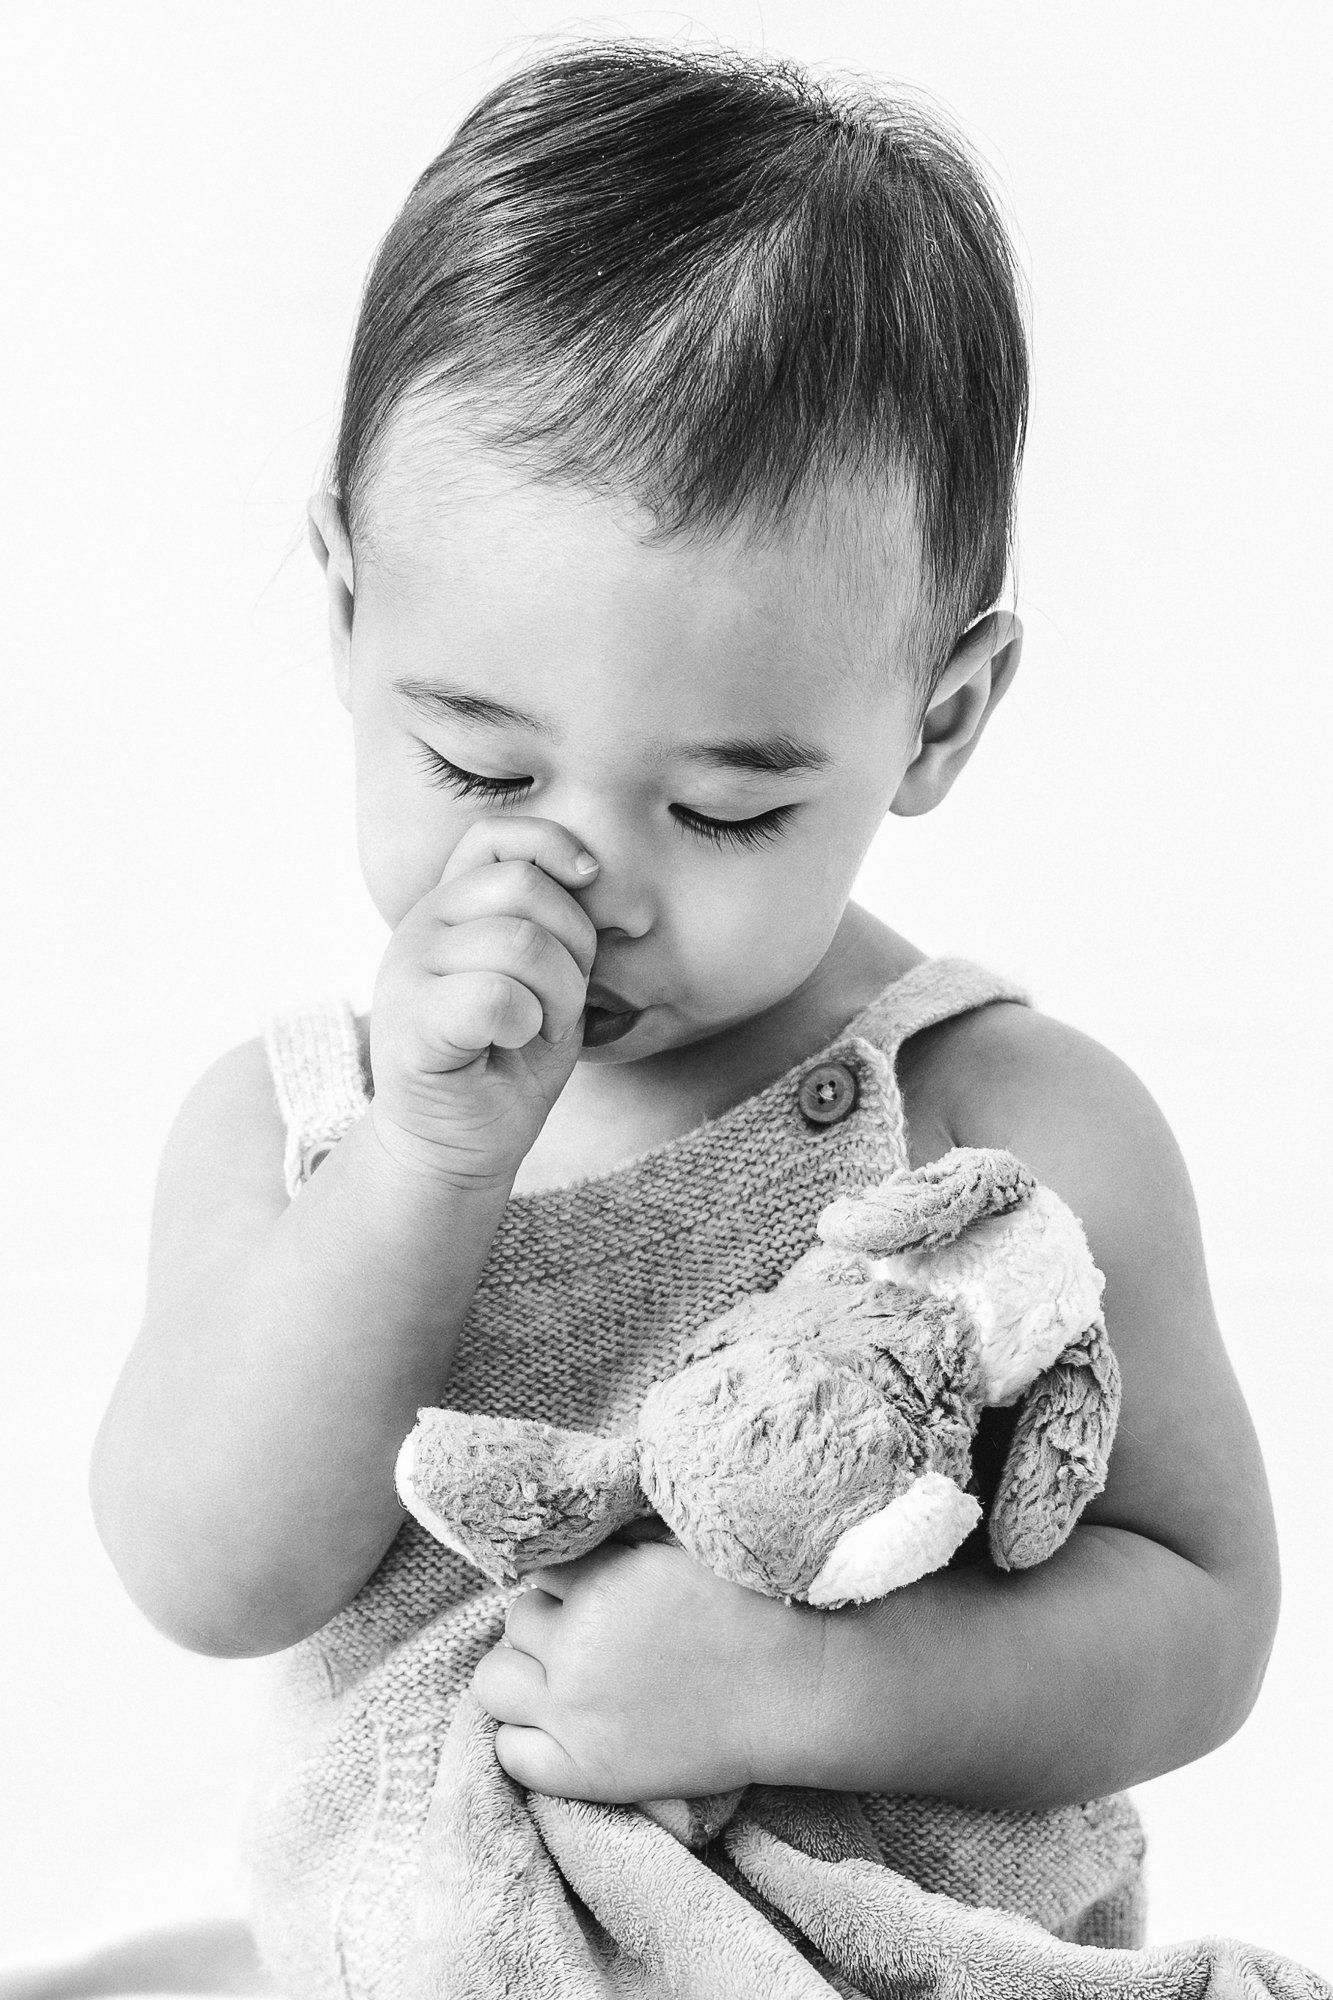   Intimate black and white family photoshoot with child holding teddy bear and sucking his thumb taken by Nicole Hawkins, Northern New Jersey Family Photographer. Toddler poses for family photos #EssexCountyFamilyPhotographer #BergenCountyFamilyPhoto